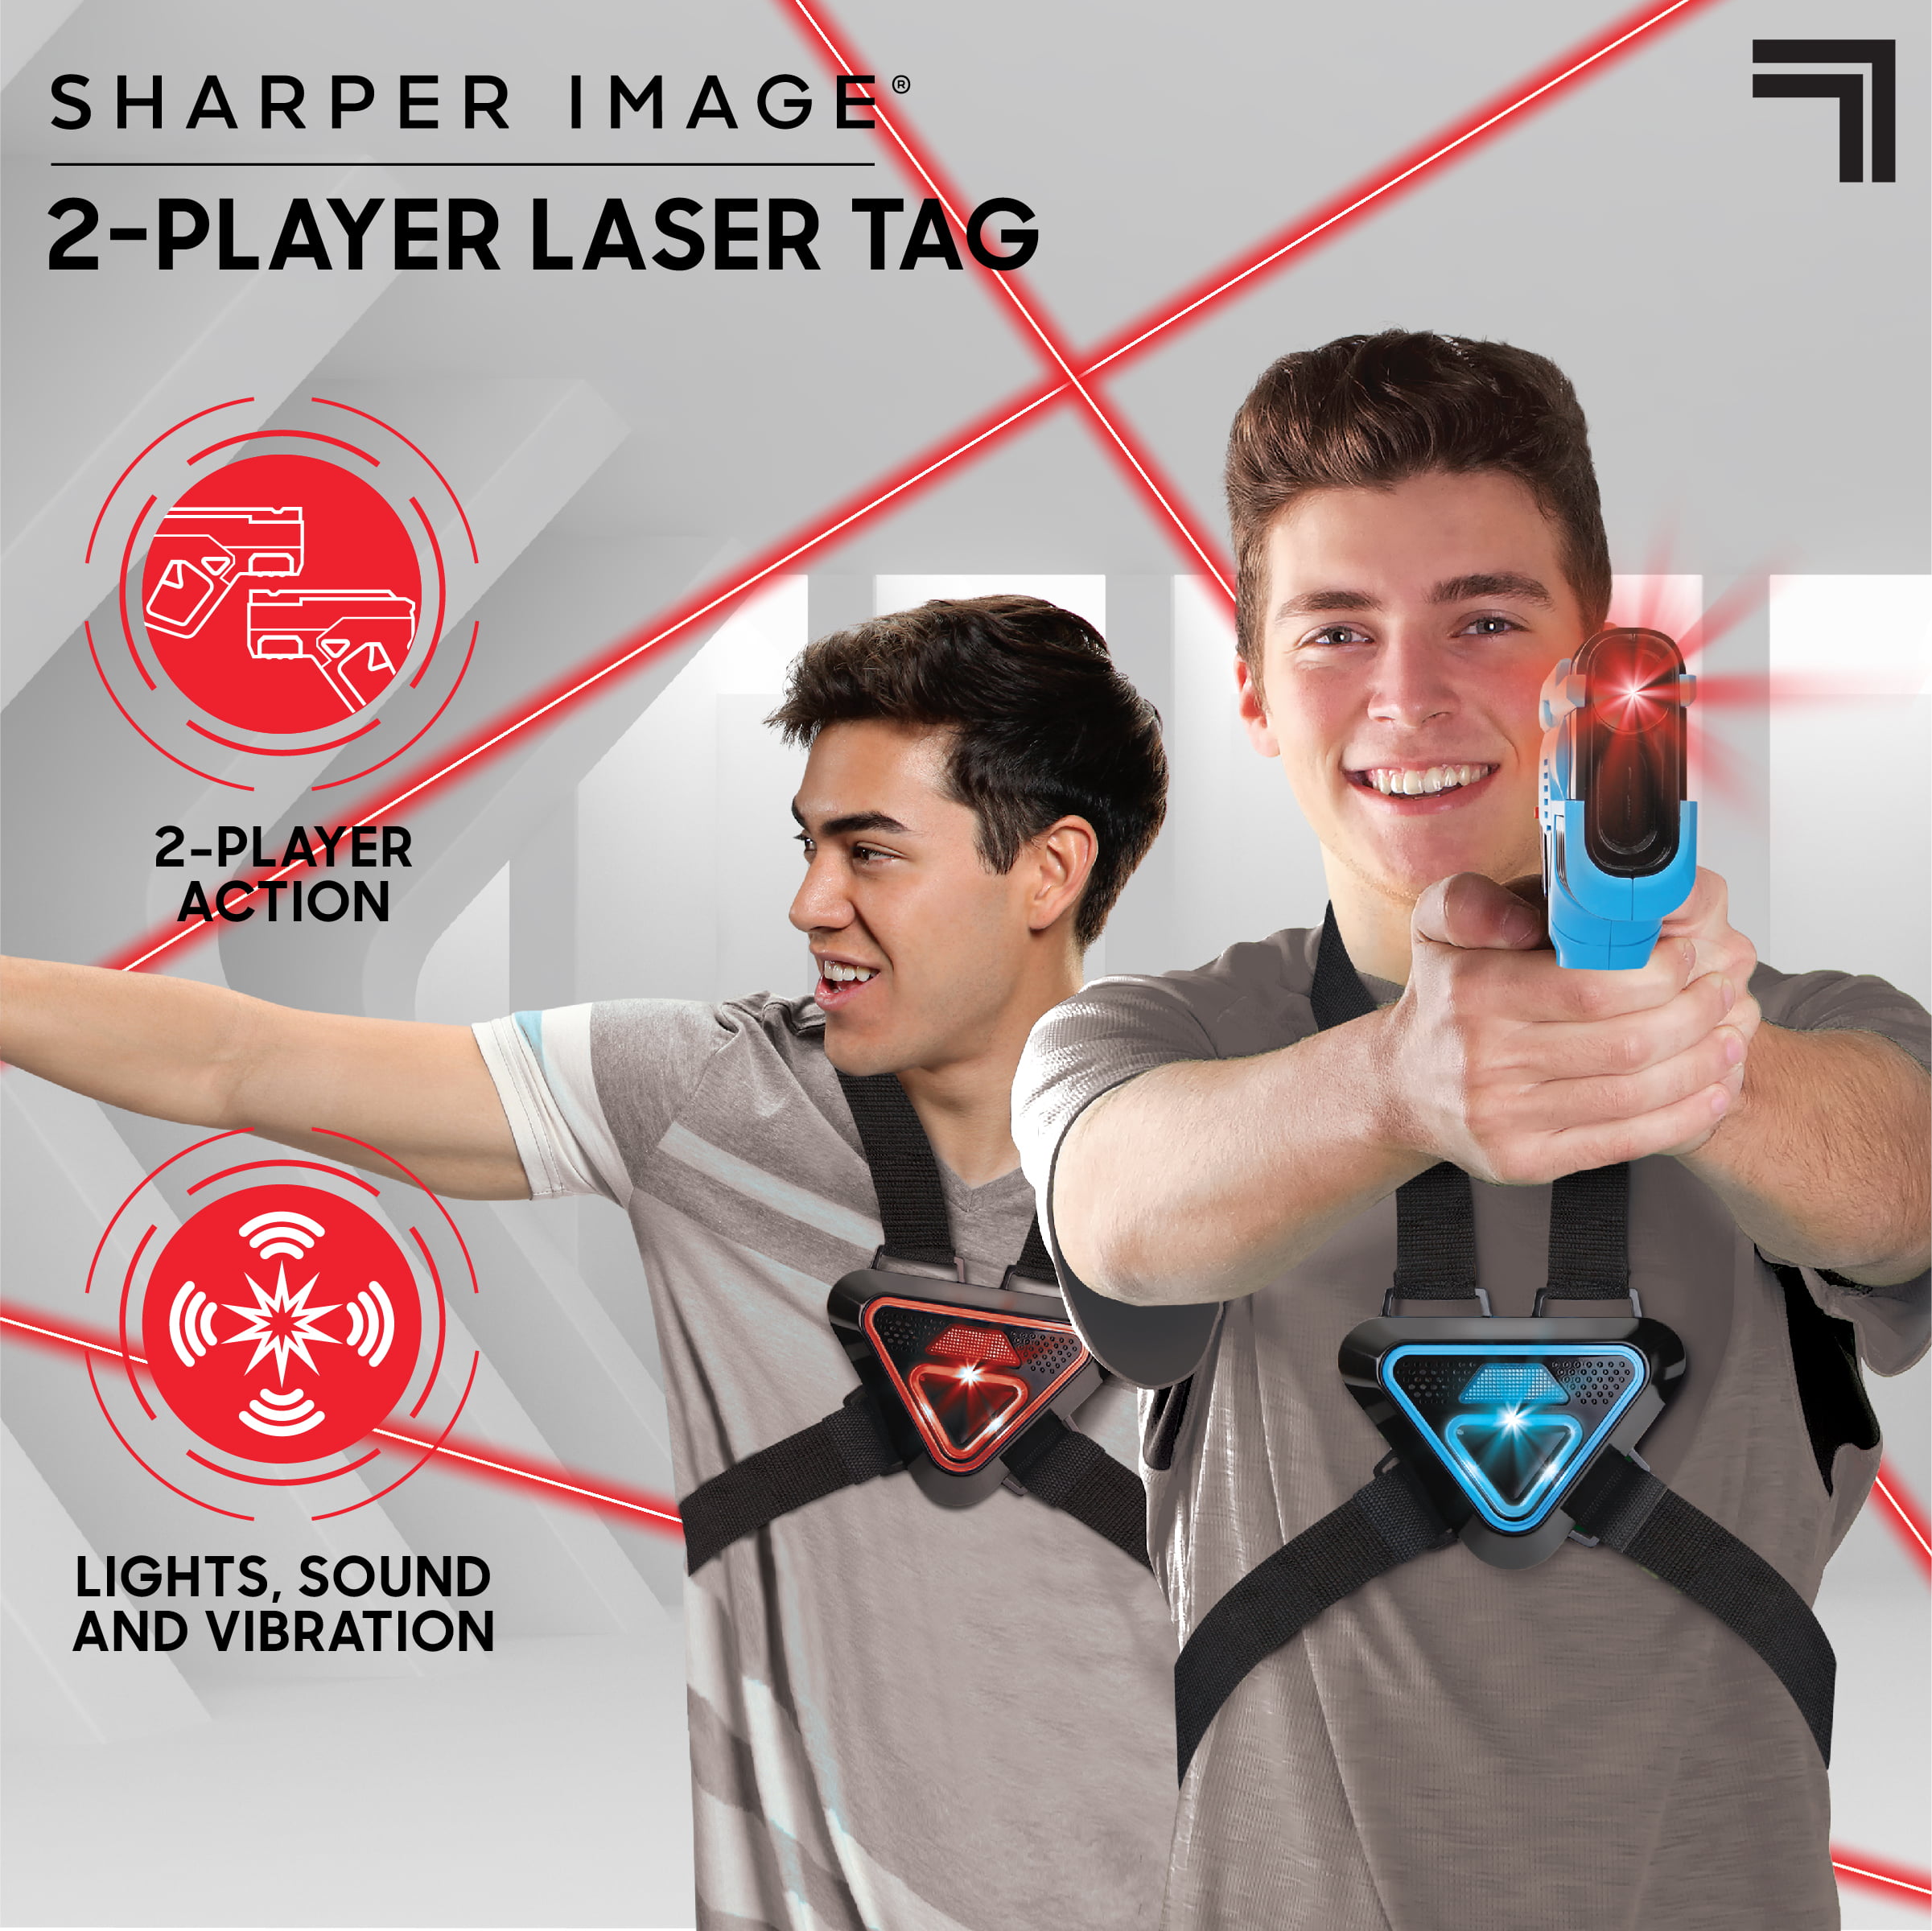 2018 Sharper Image Augmented Reality Laser Game Age 8 Gr8 Gift for sale online 